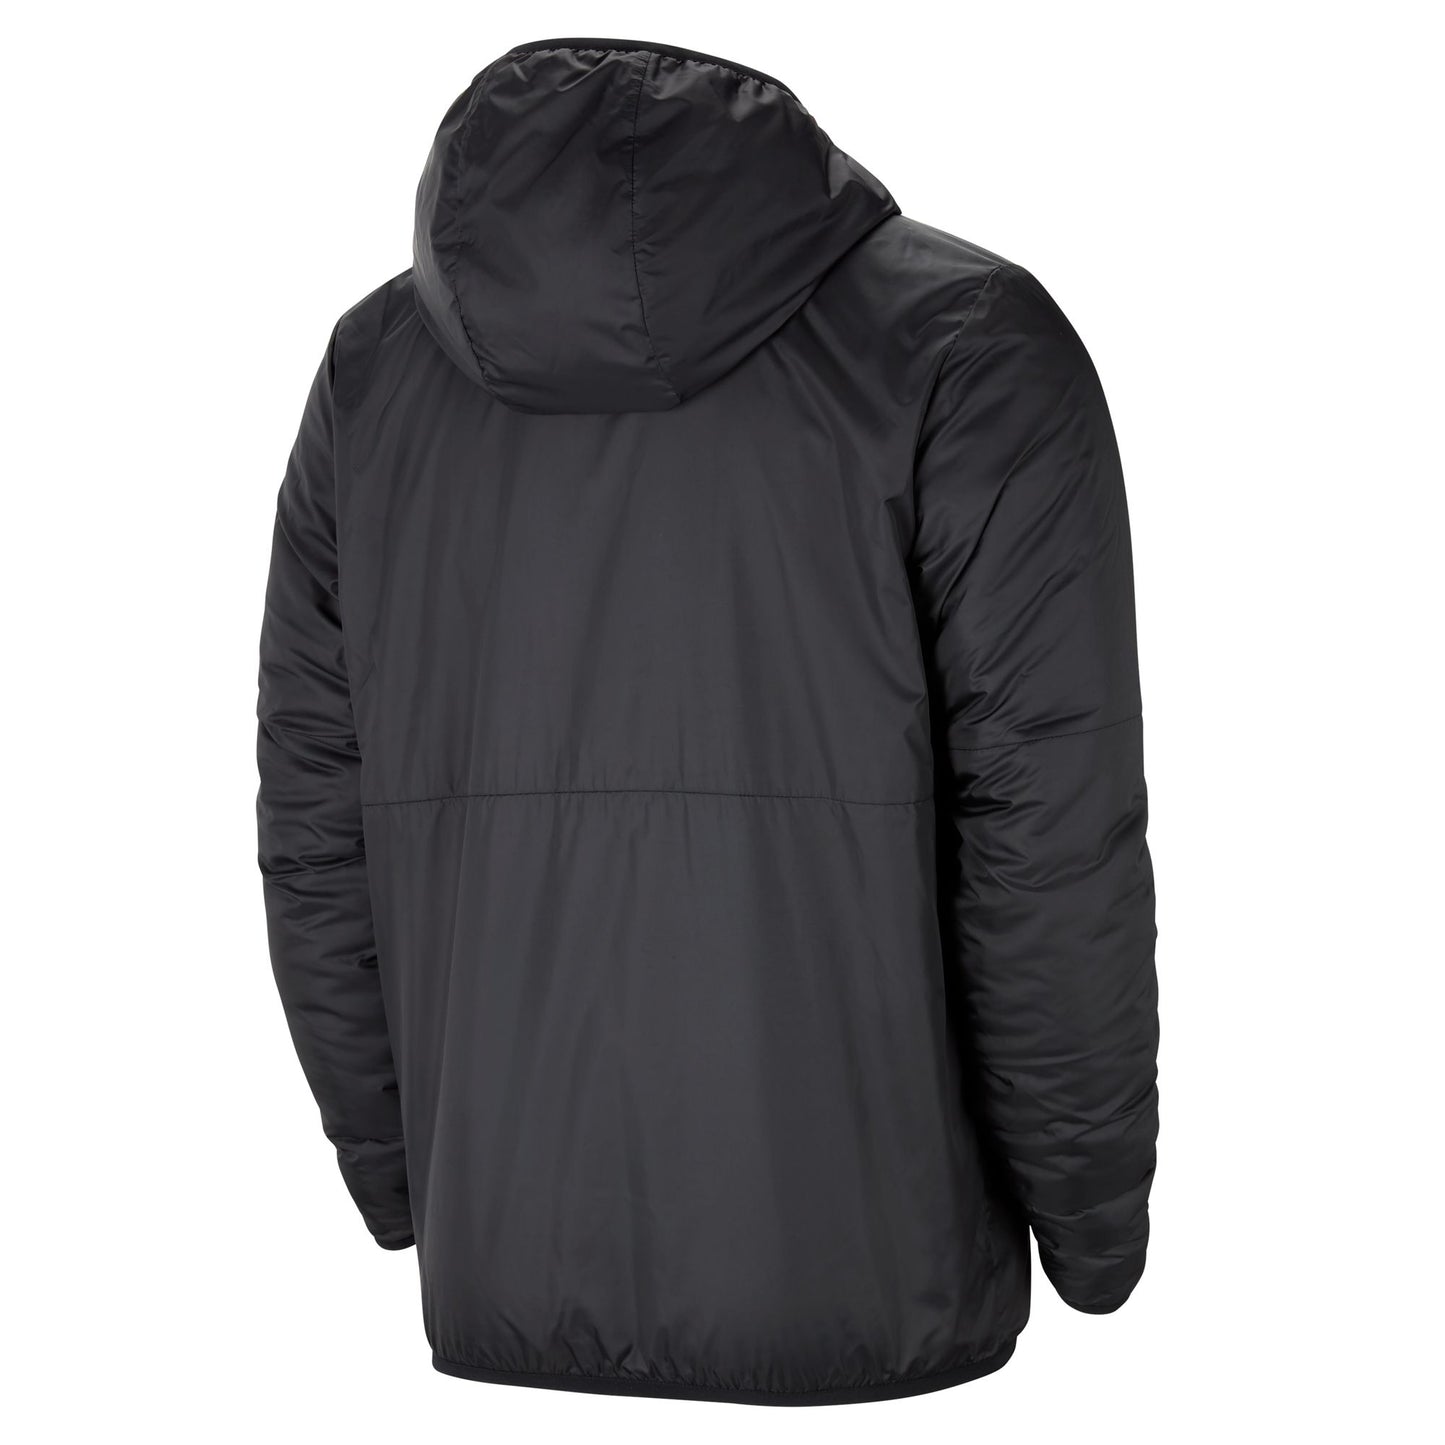 THE PRO PROJECT NIKE THERMAL FALL JACKET - MEN'S